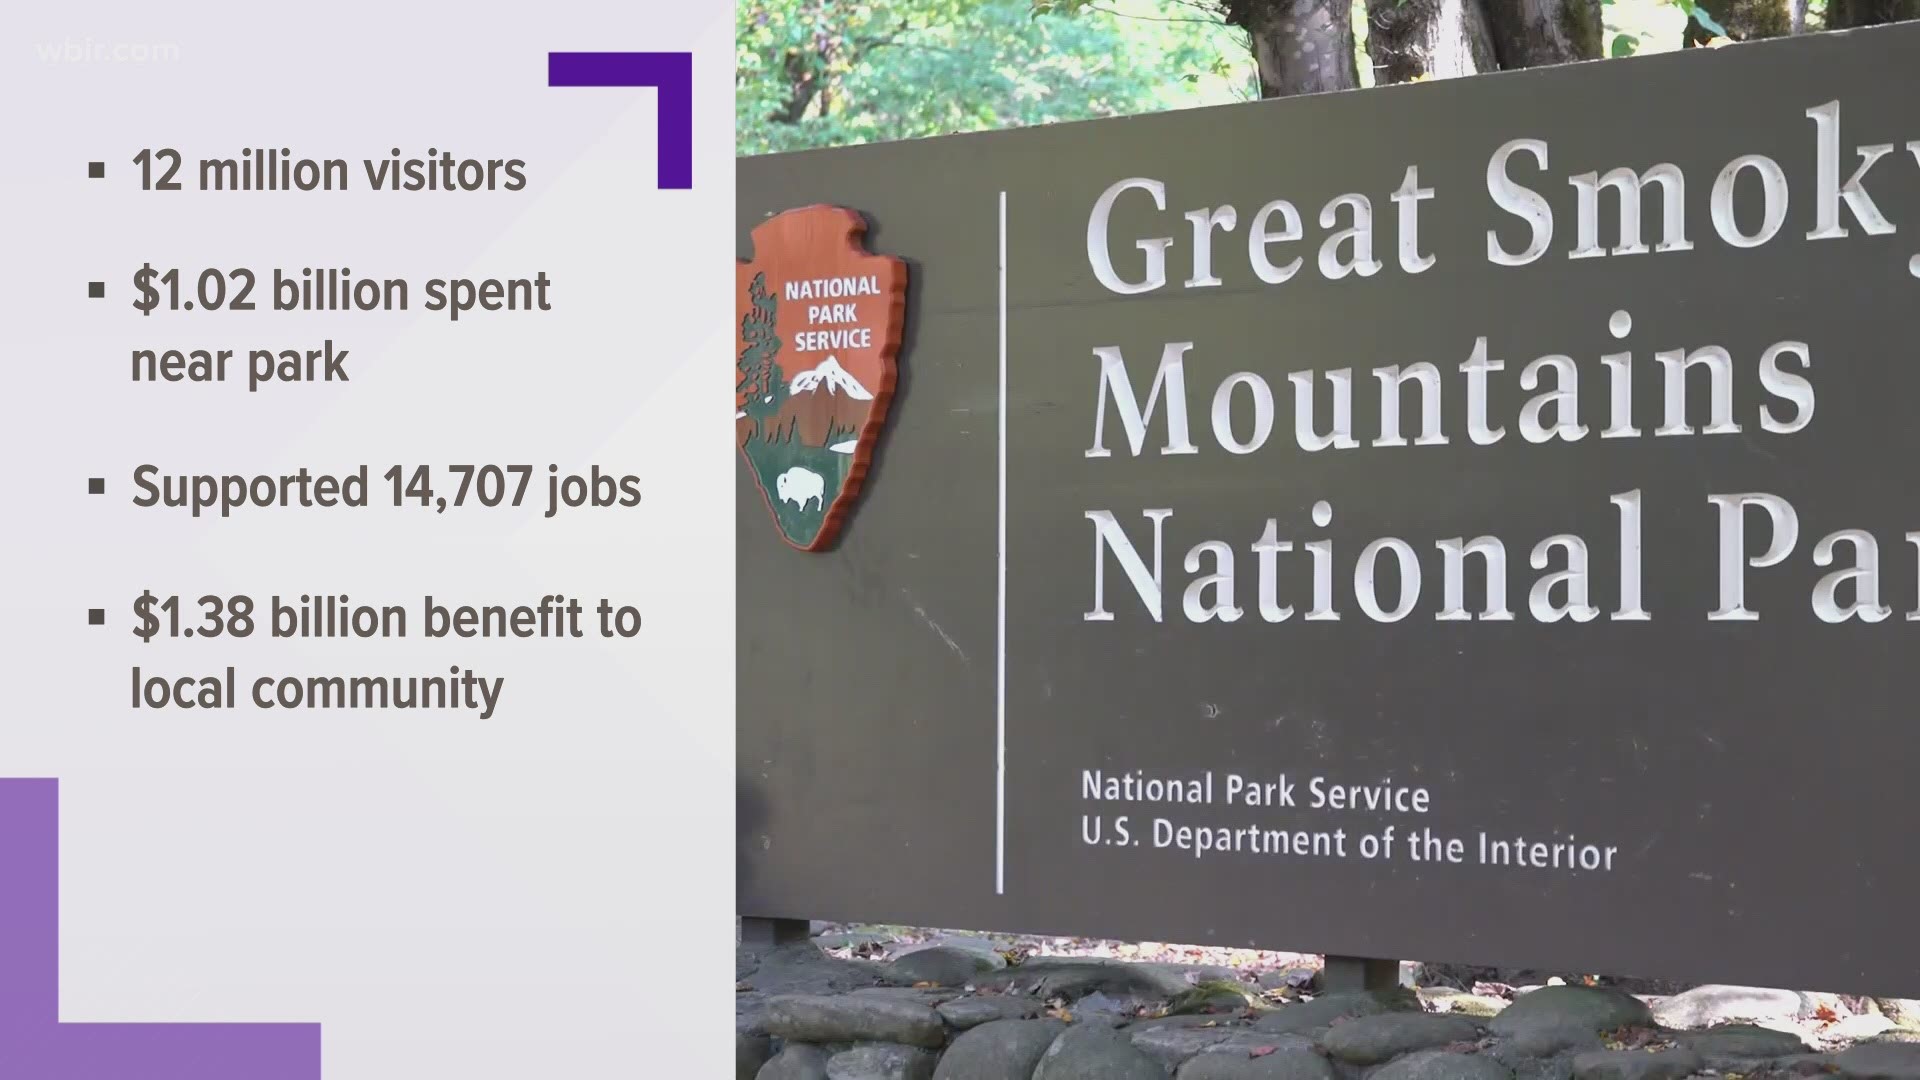 A report from the National Parks Service said more than 12 million people visited the Smokies in 2020, spending over $1 billion in nearby communities.